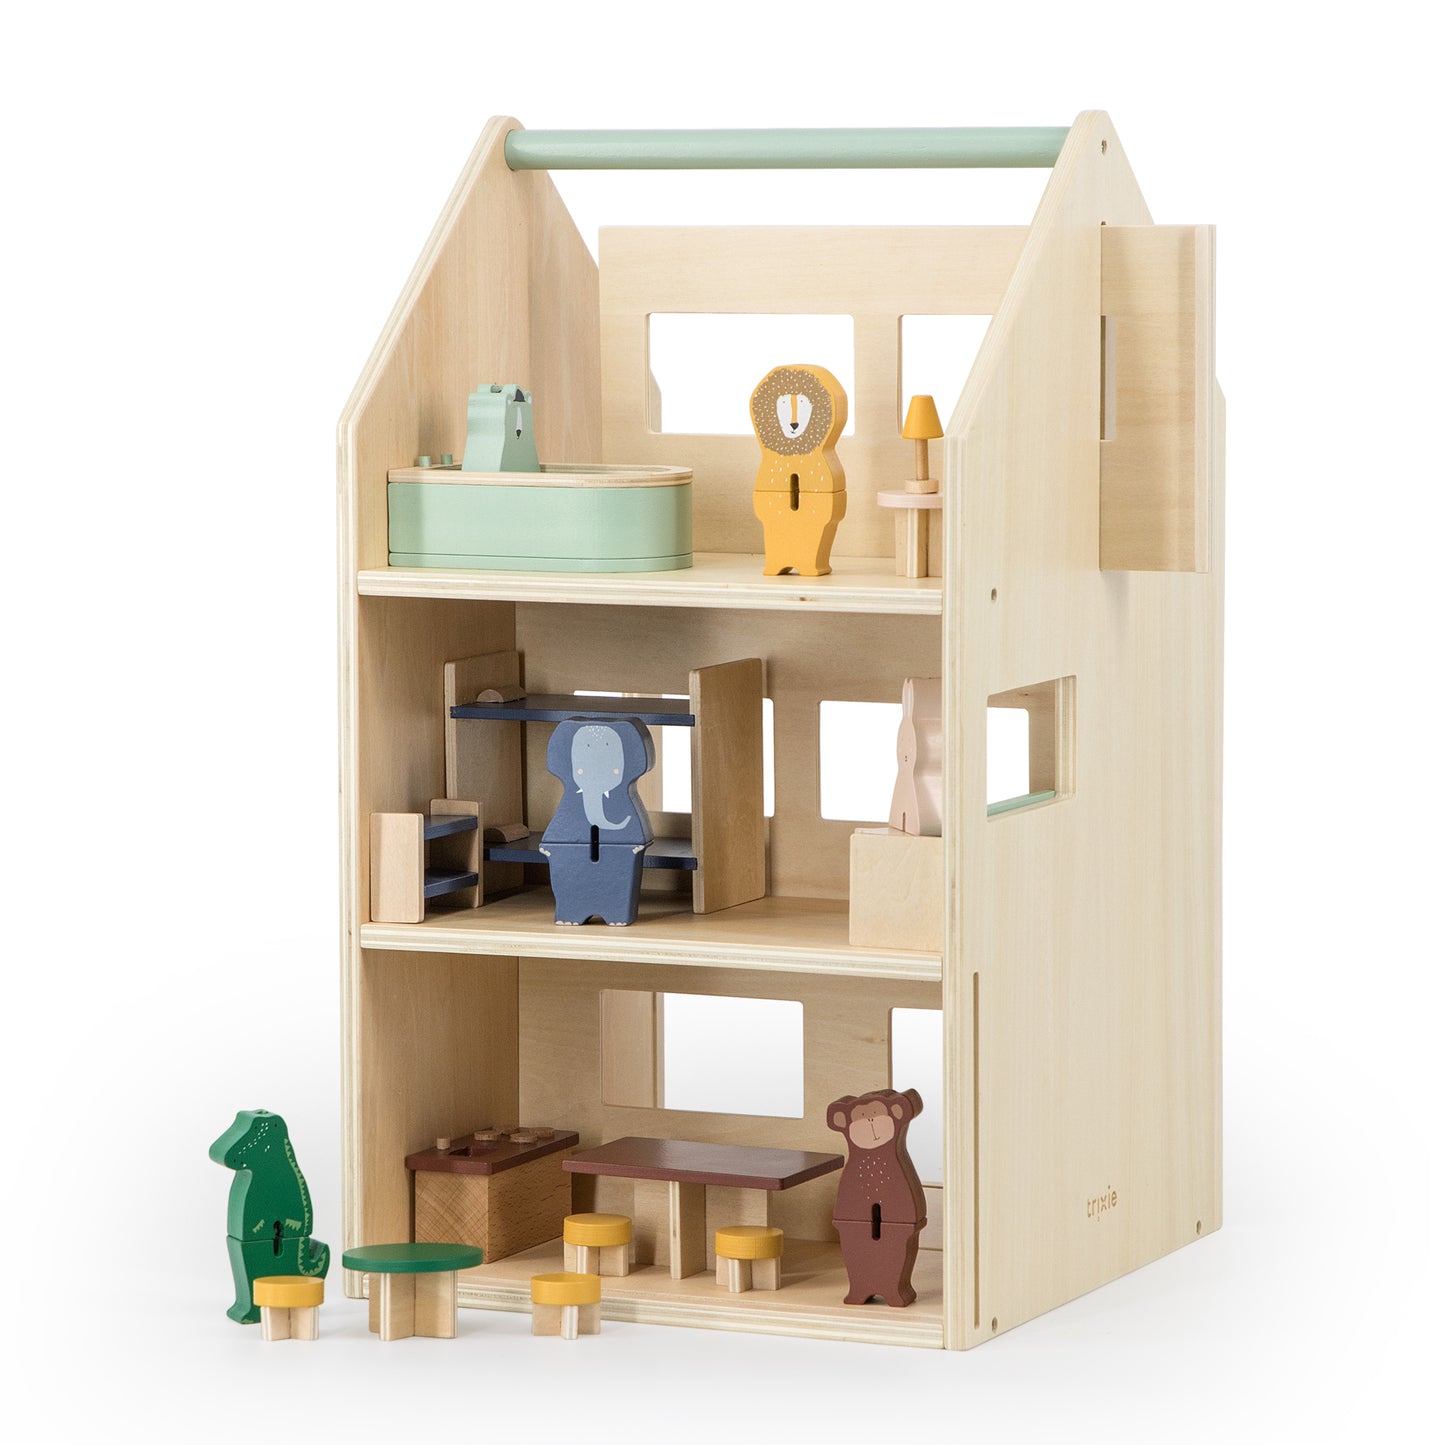 Trixie wooden play house with accessories